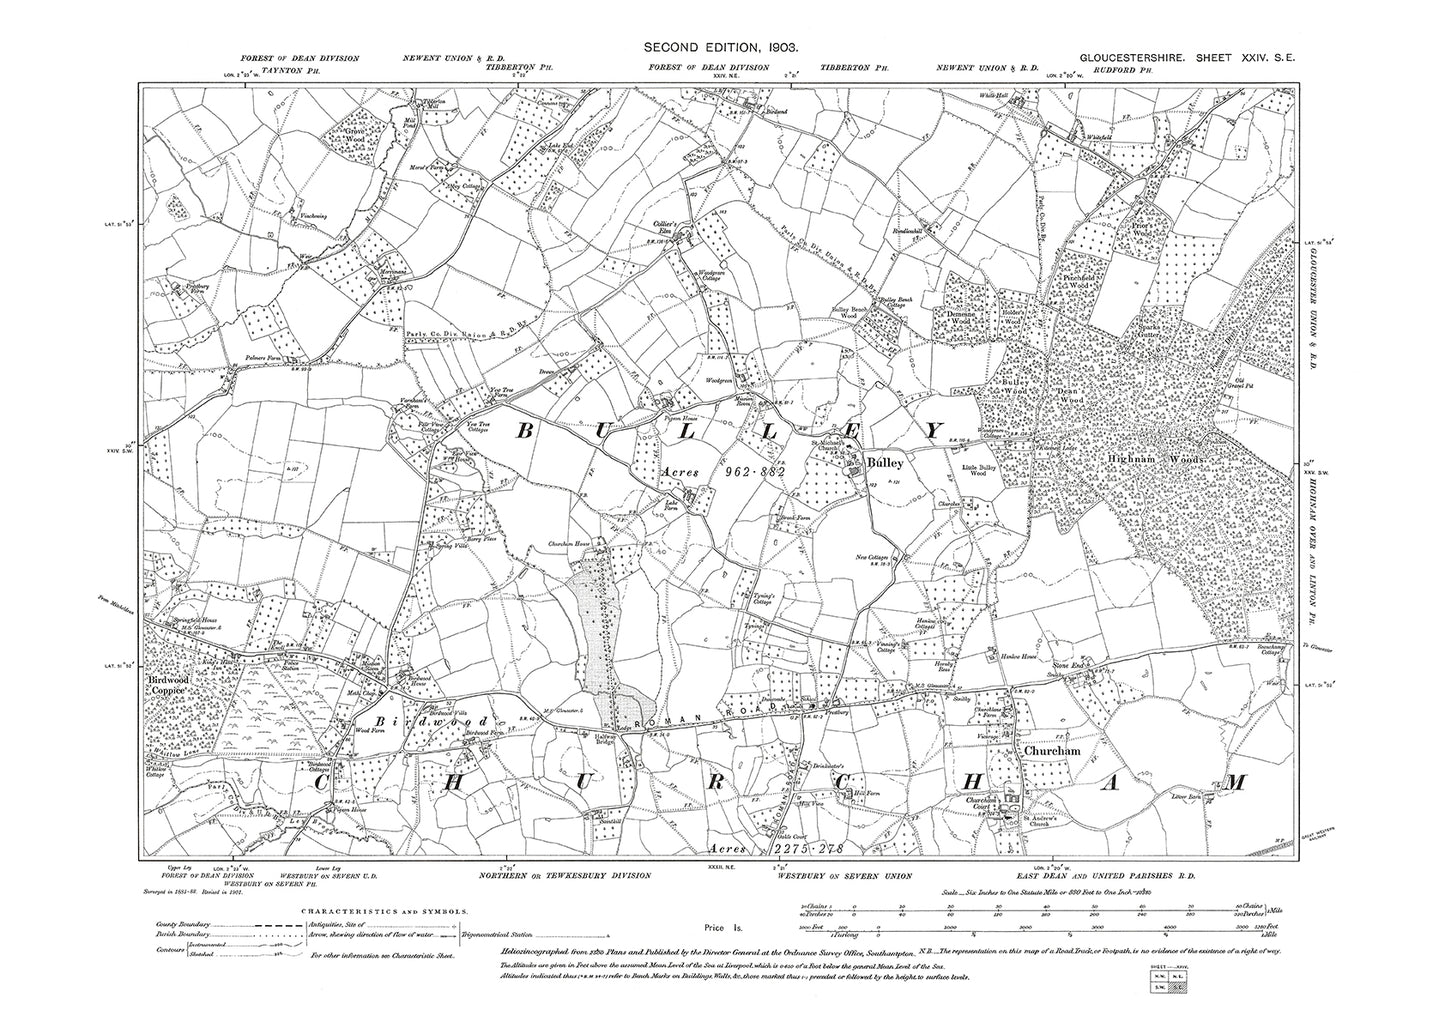 Old OS map dated 1903, showing Bulley, Churcham in Gloucestershire - 24SE